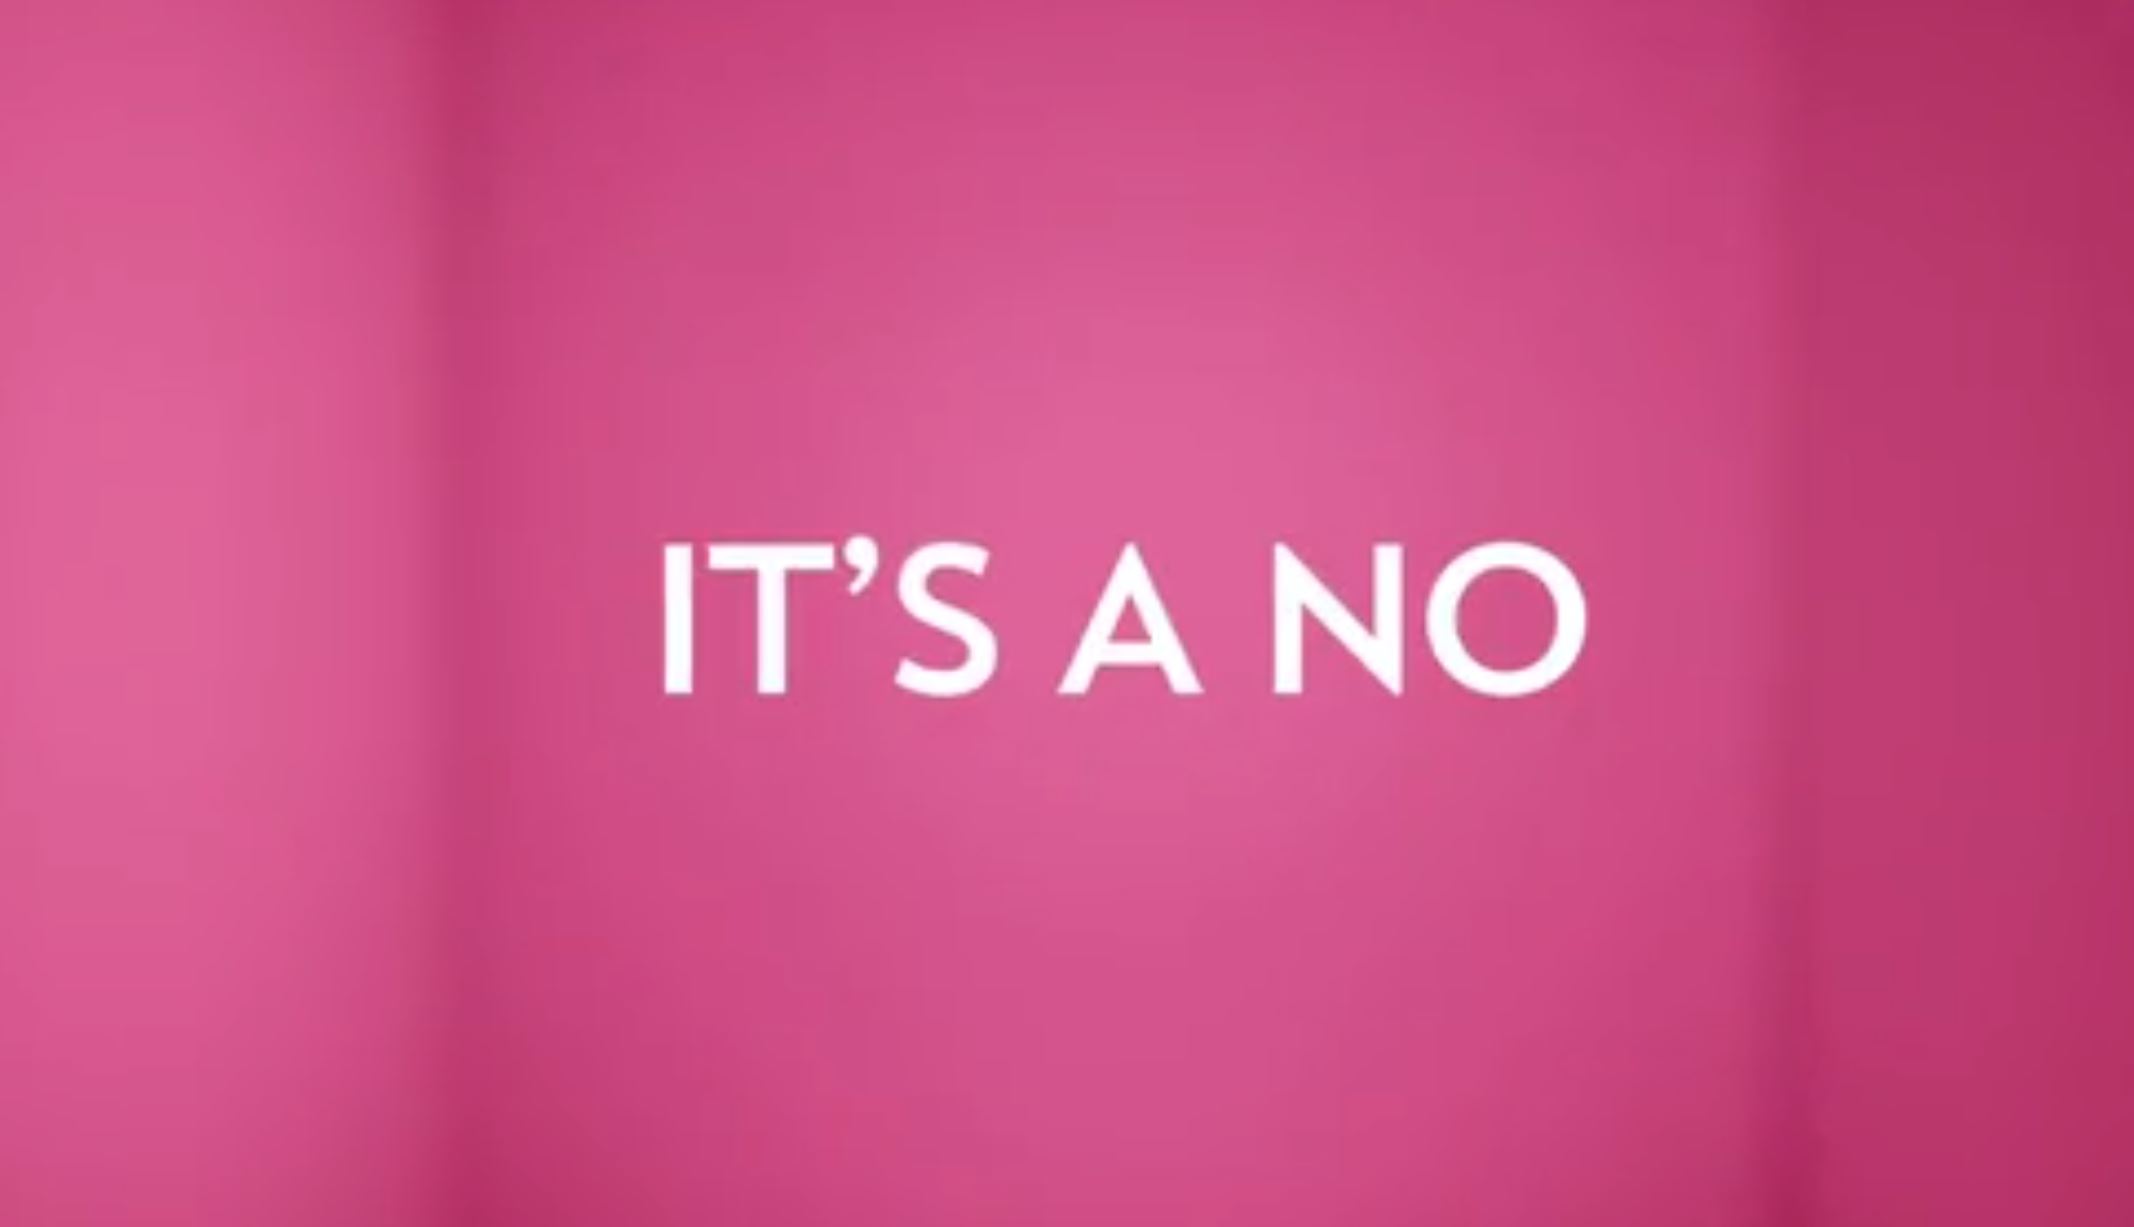 "It's a no", from the advertisment.